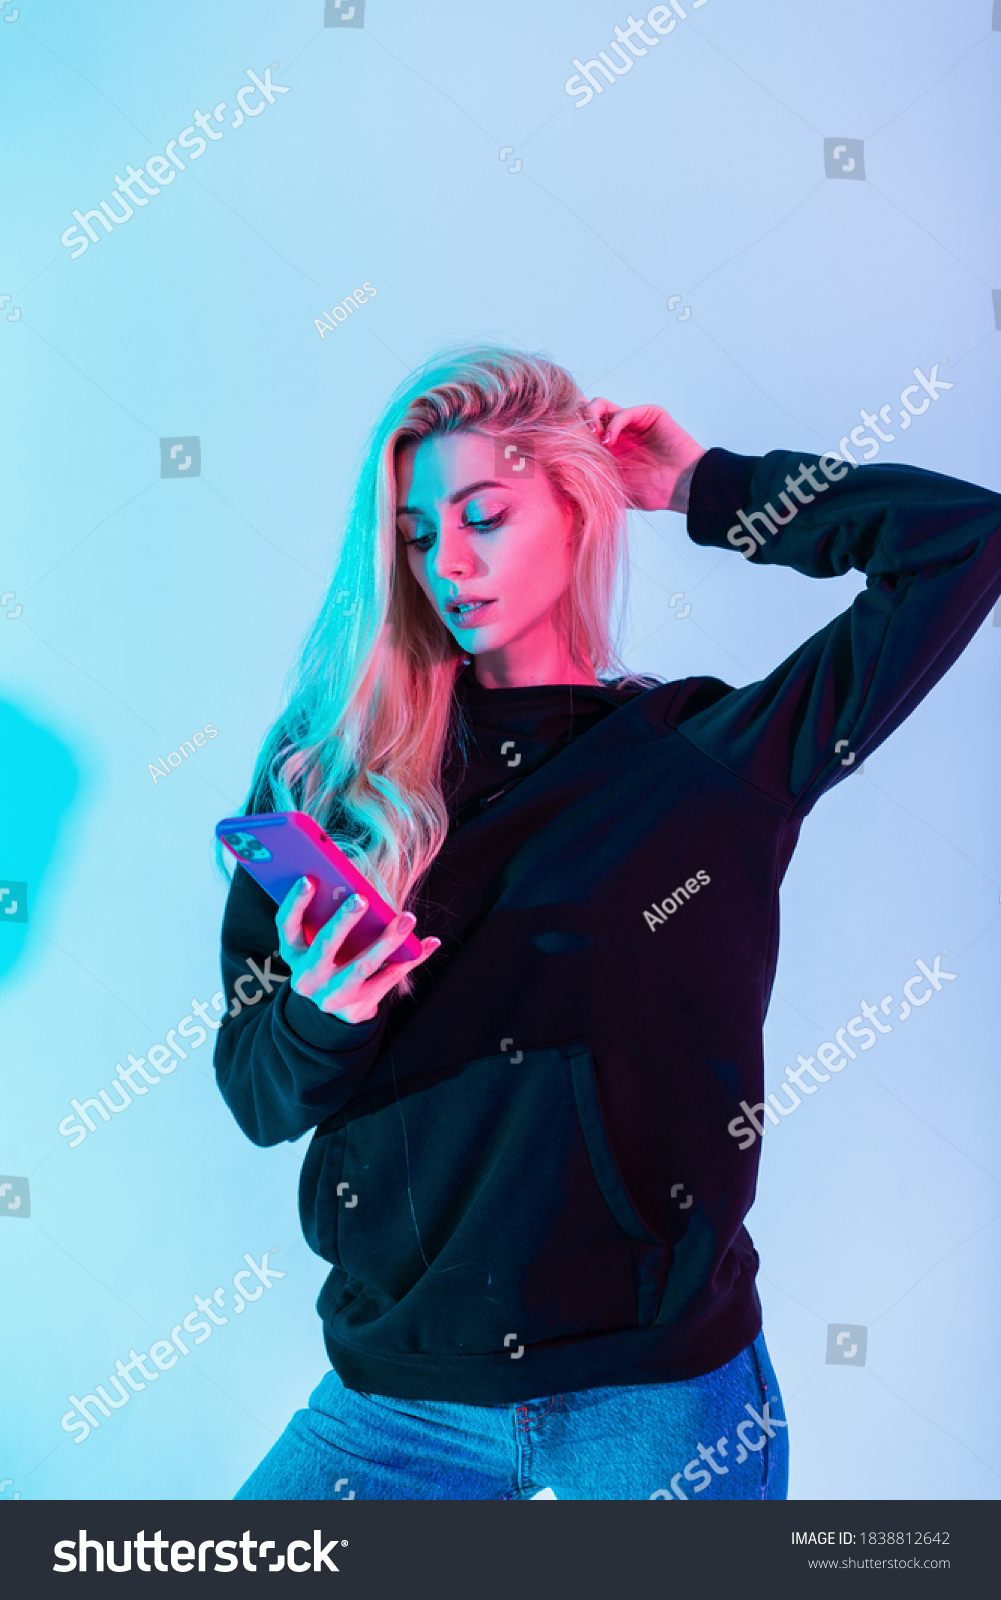 Glamorous beautiful woman model with pretty beauty face in fashion black hoodie and blue jeans with a phone on a colorful neon pink light background #1838812642